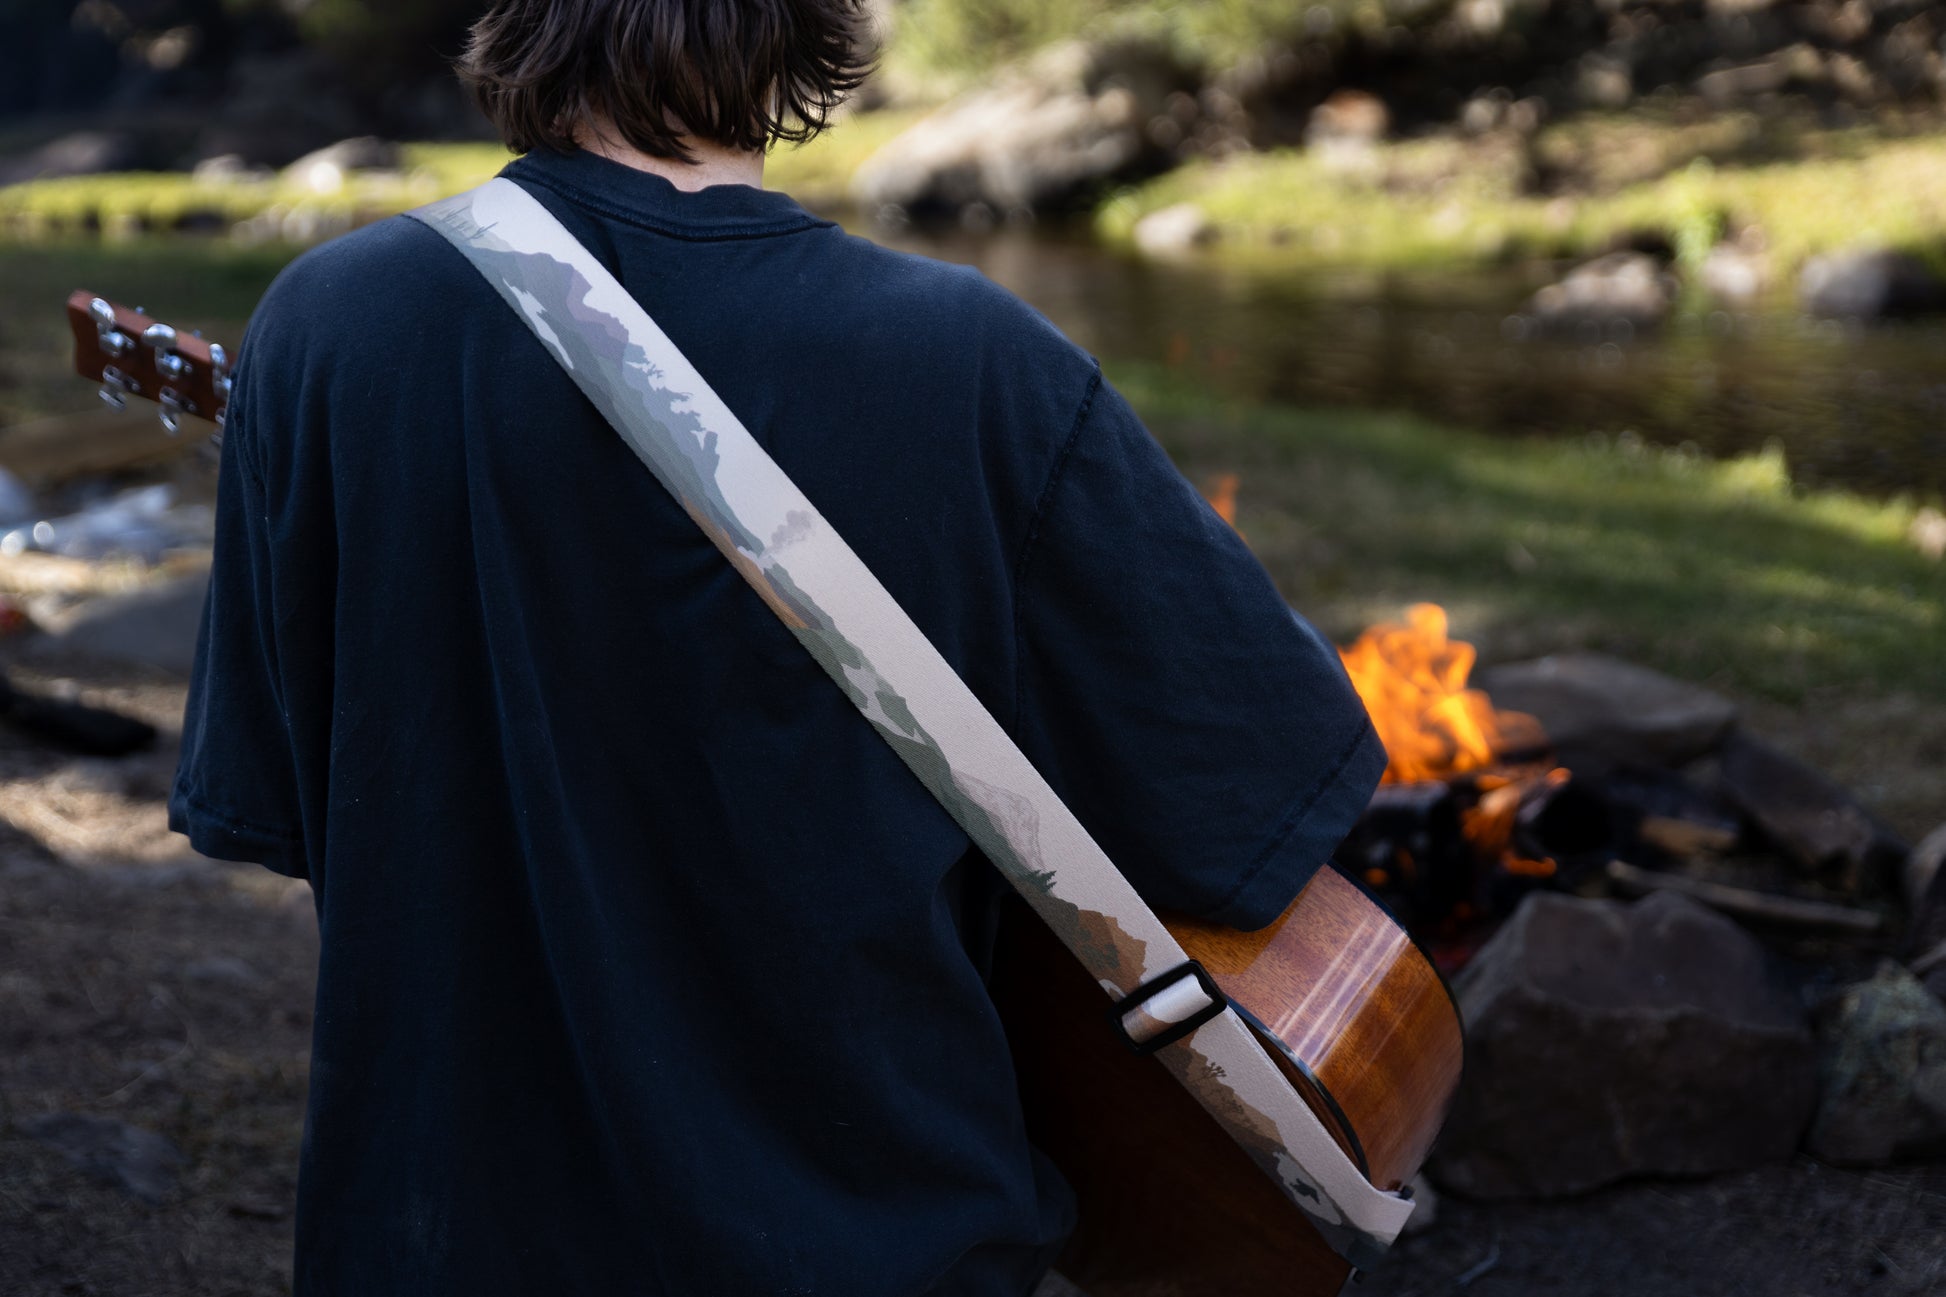 Parks in color guitar strap National Park design outside around a campfire playing guitar